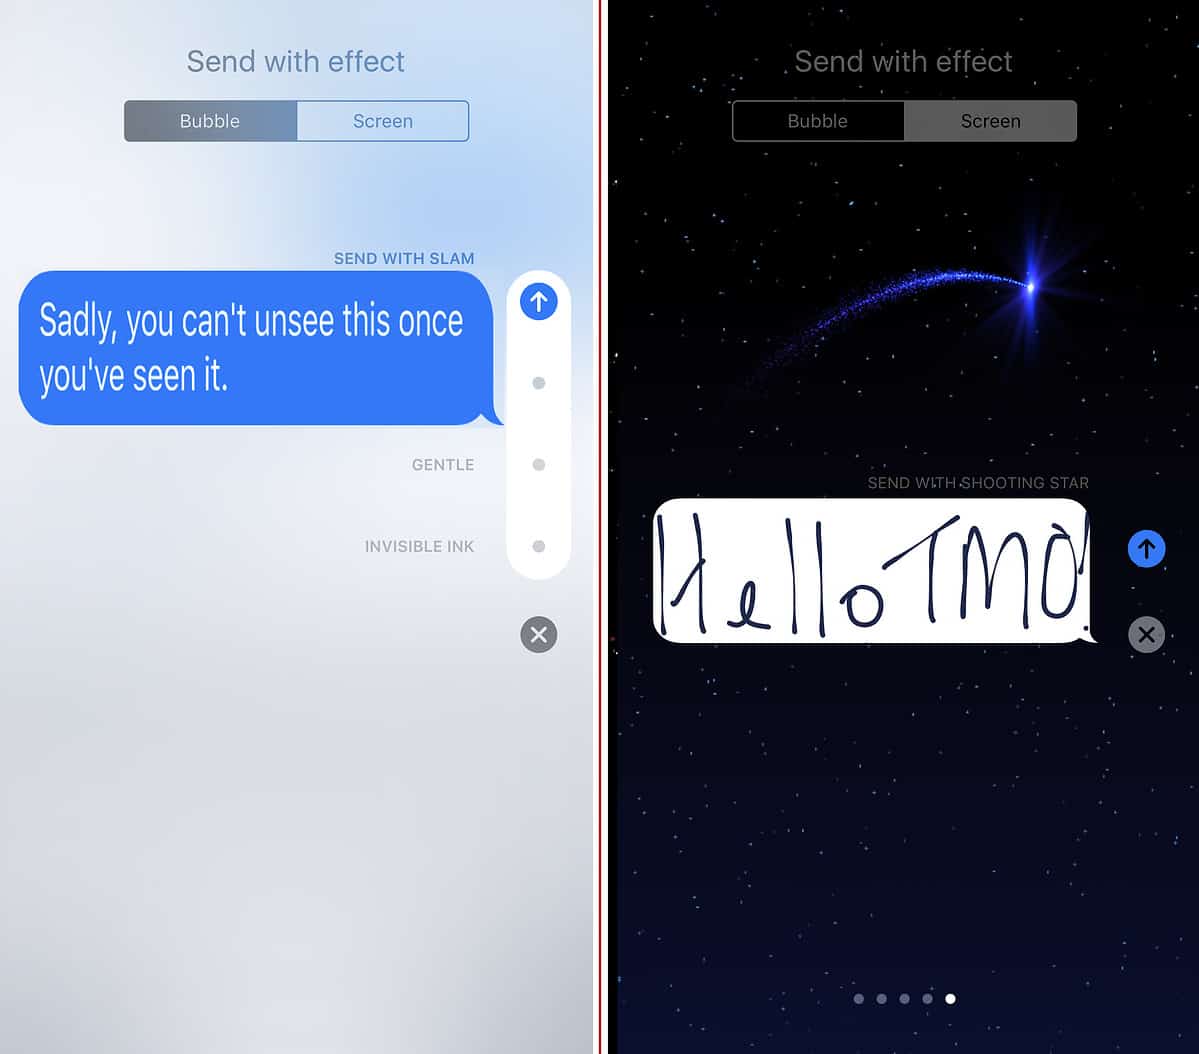 The bubble effects (left) and full screen effects (right) tabs in the iOS 10 Messages app.